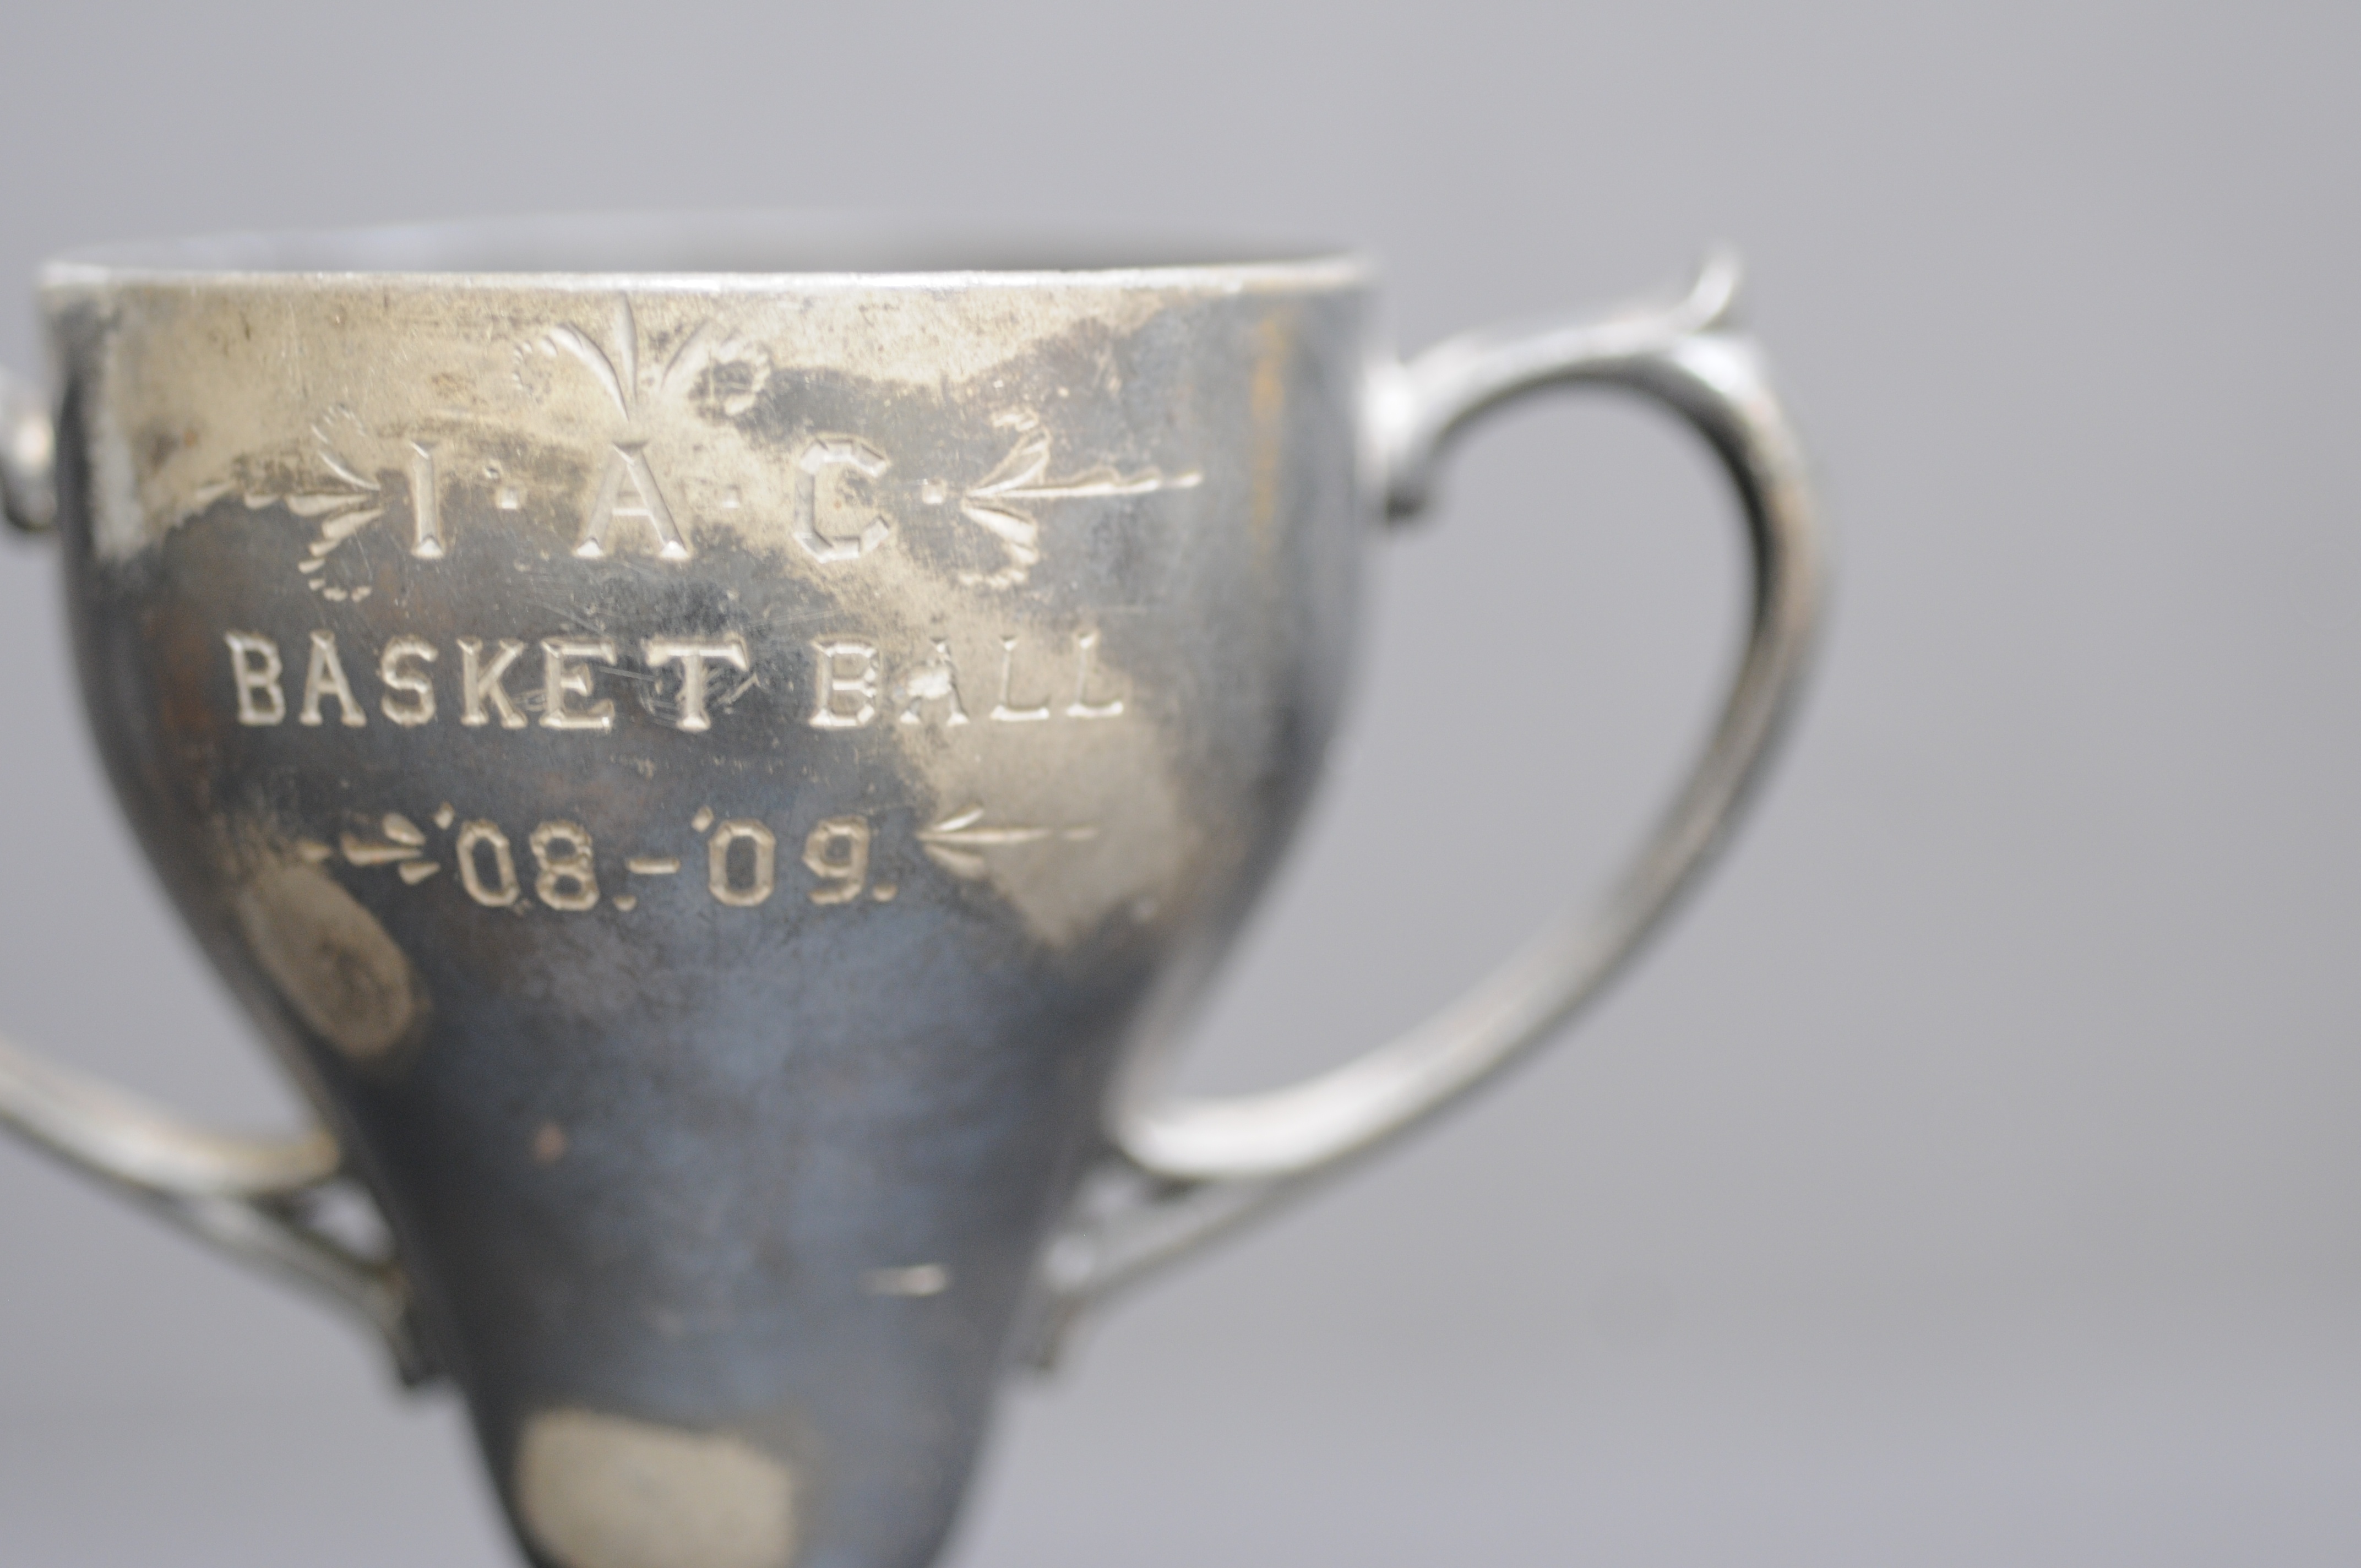 An early example of a silver "loving cup" trophy, awarded in 1909 for excellence in the sport of "basket ball."